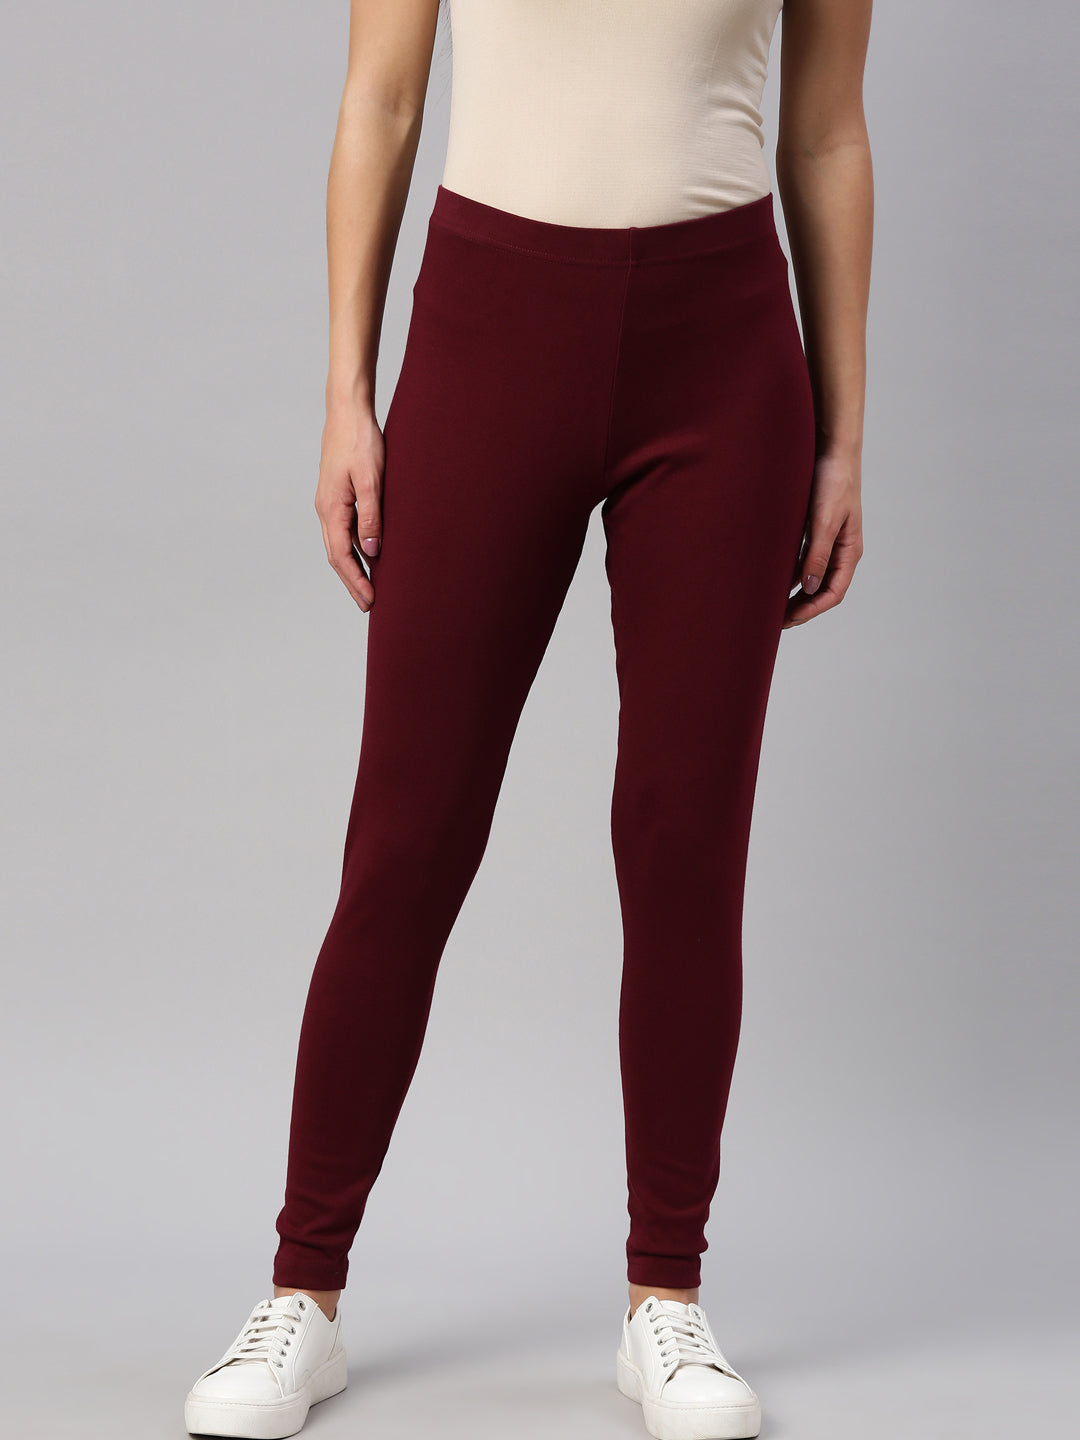 What To Wear With Burgundy Leggings? – solowomen